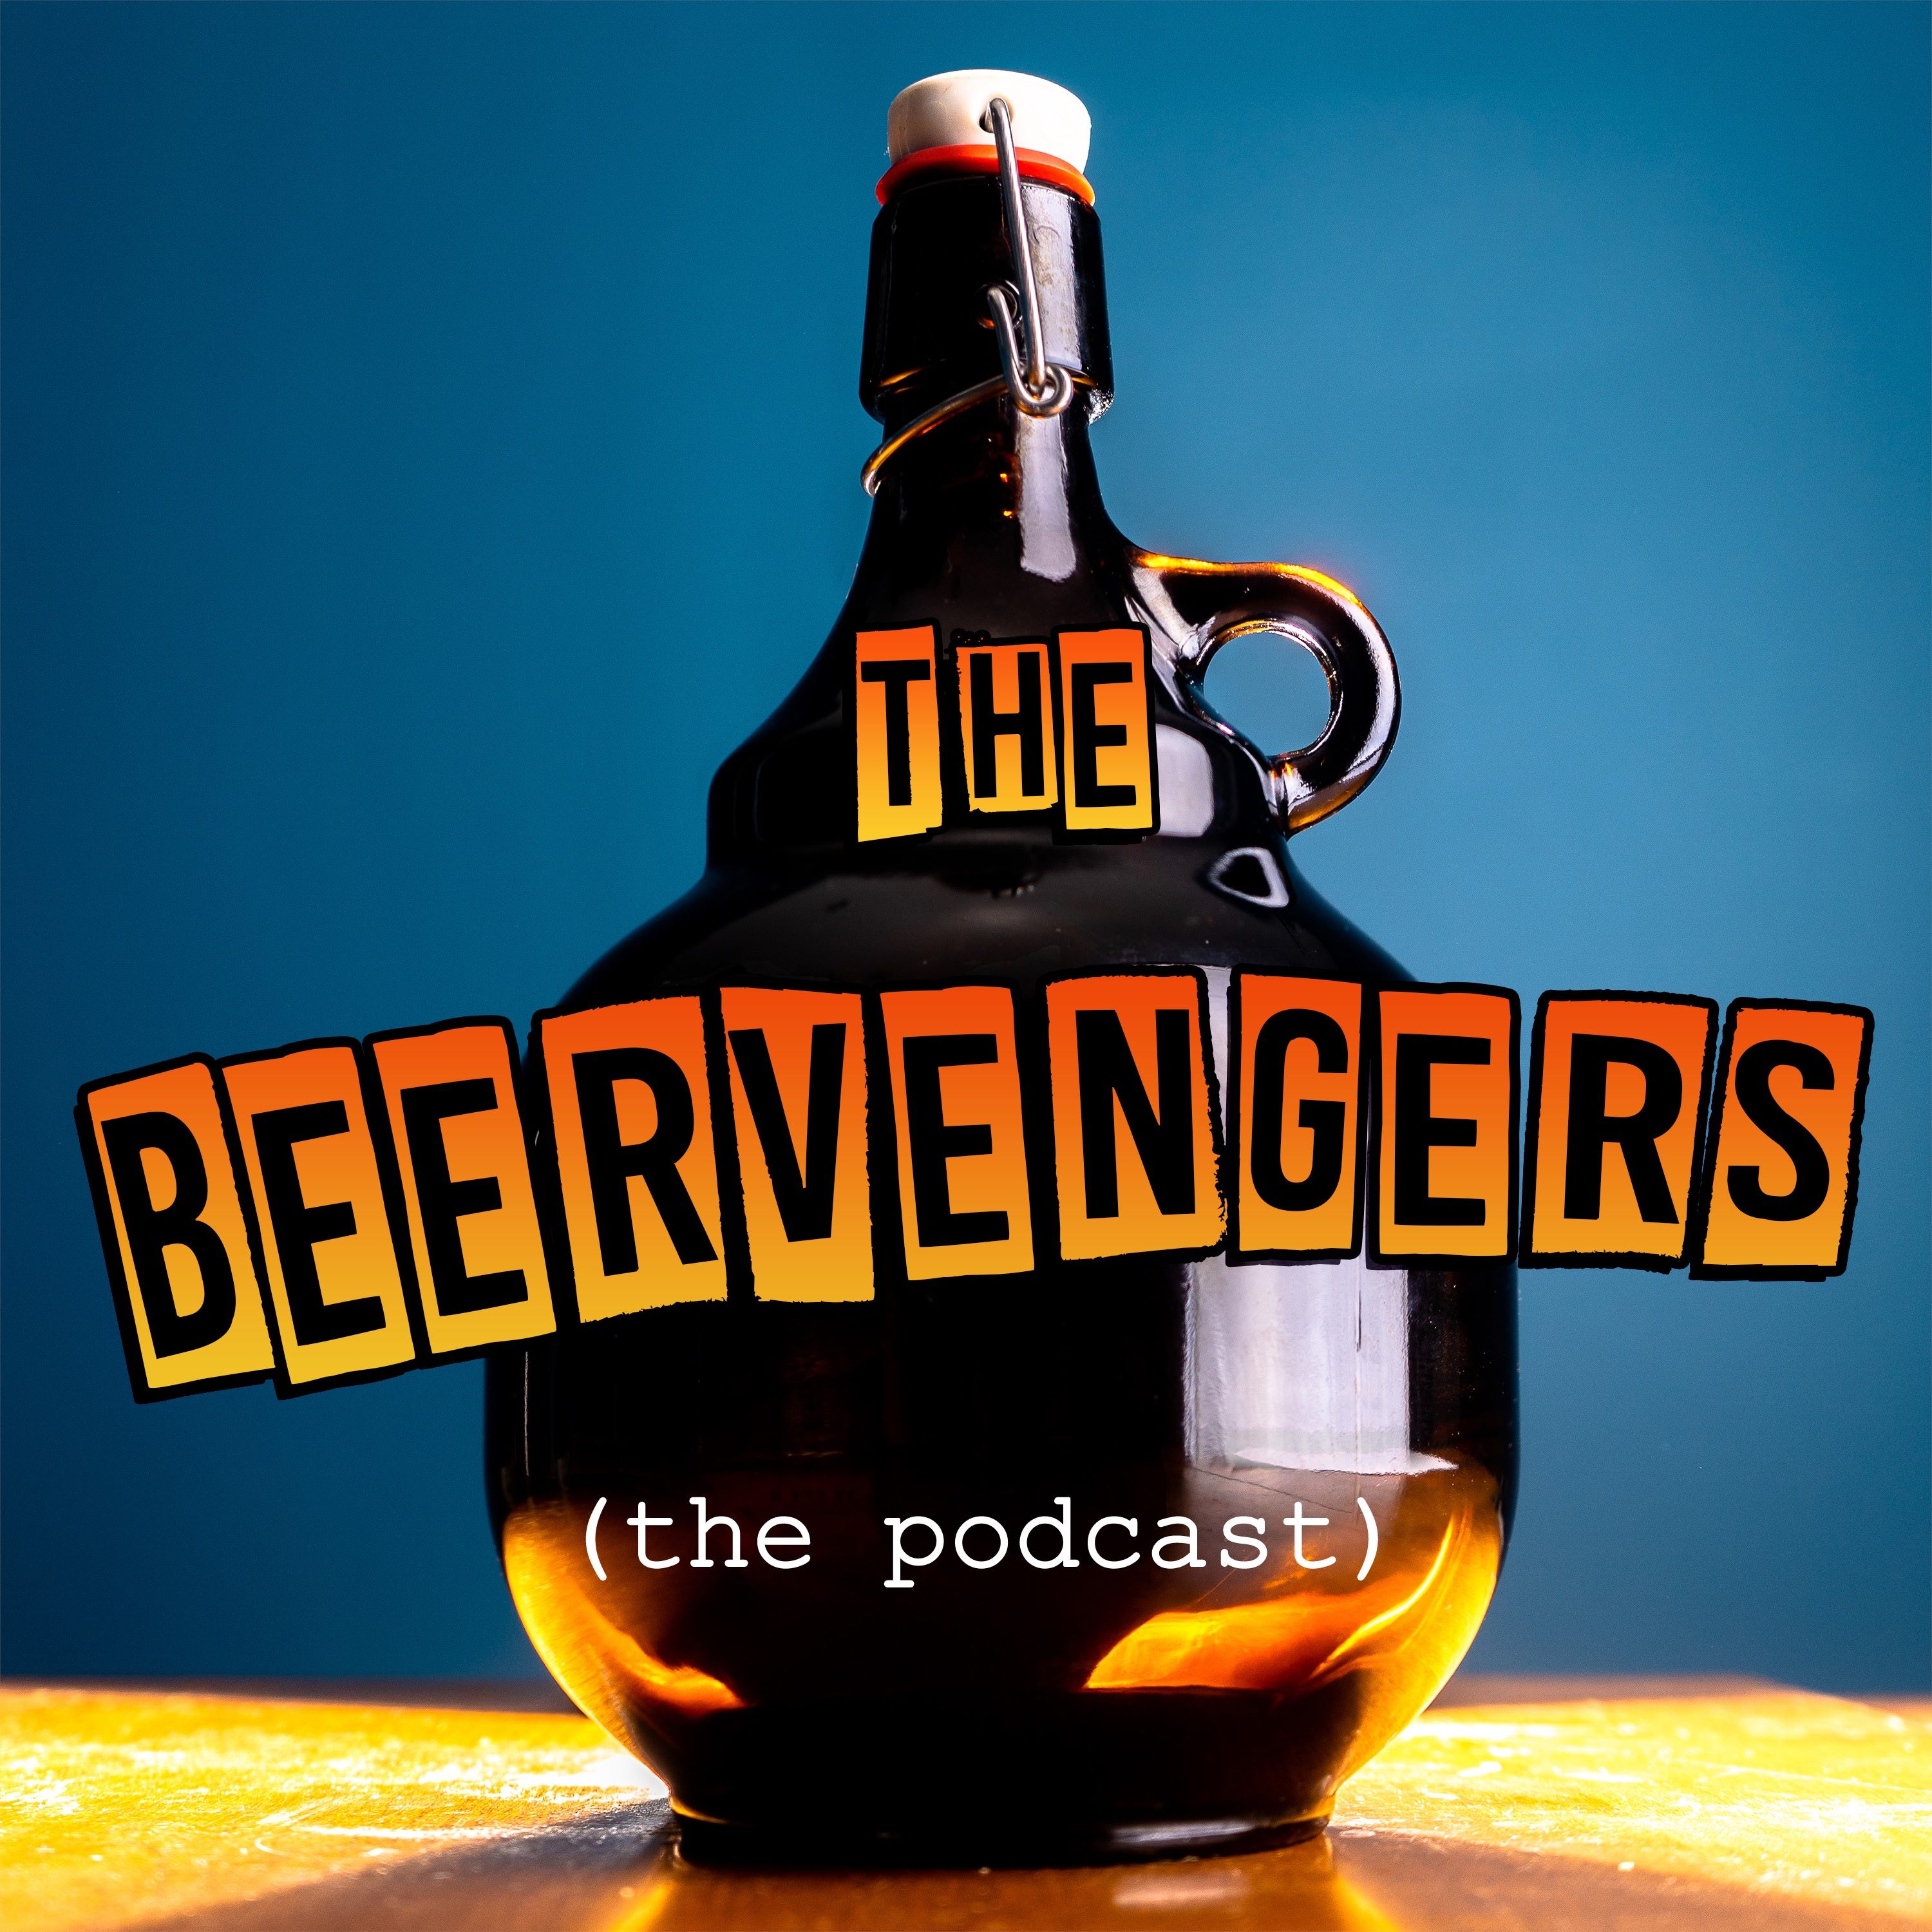 The Beervengers(the podcast)